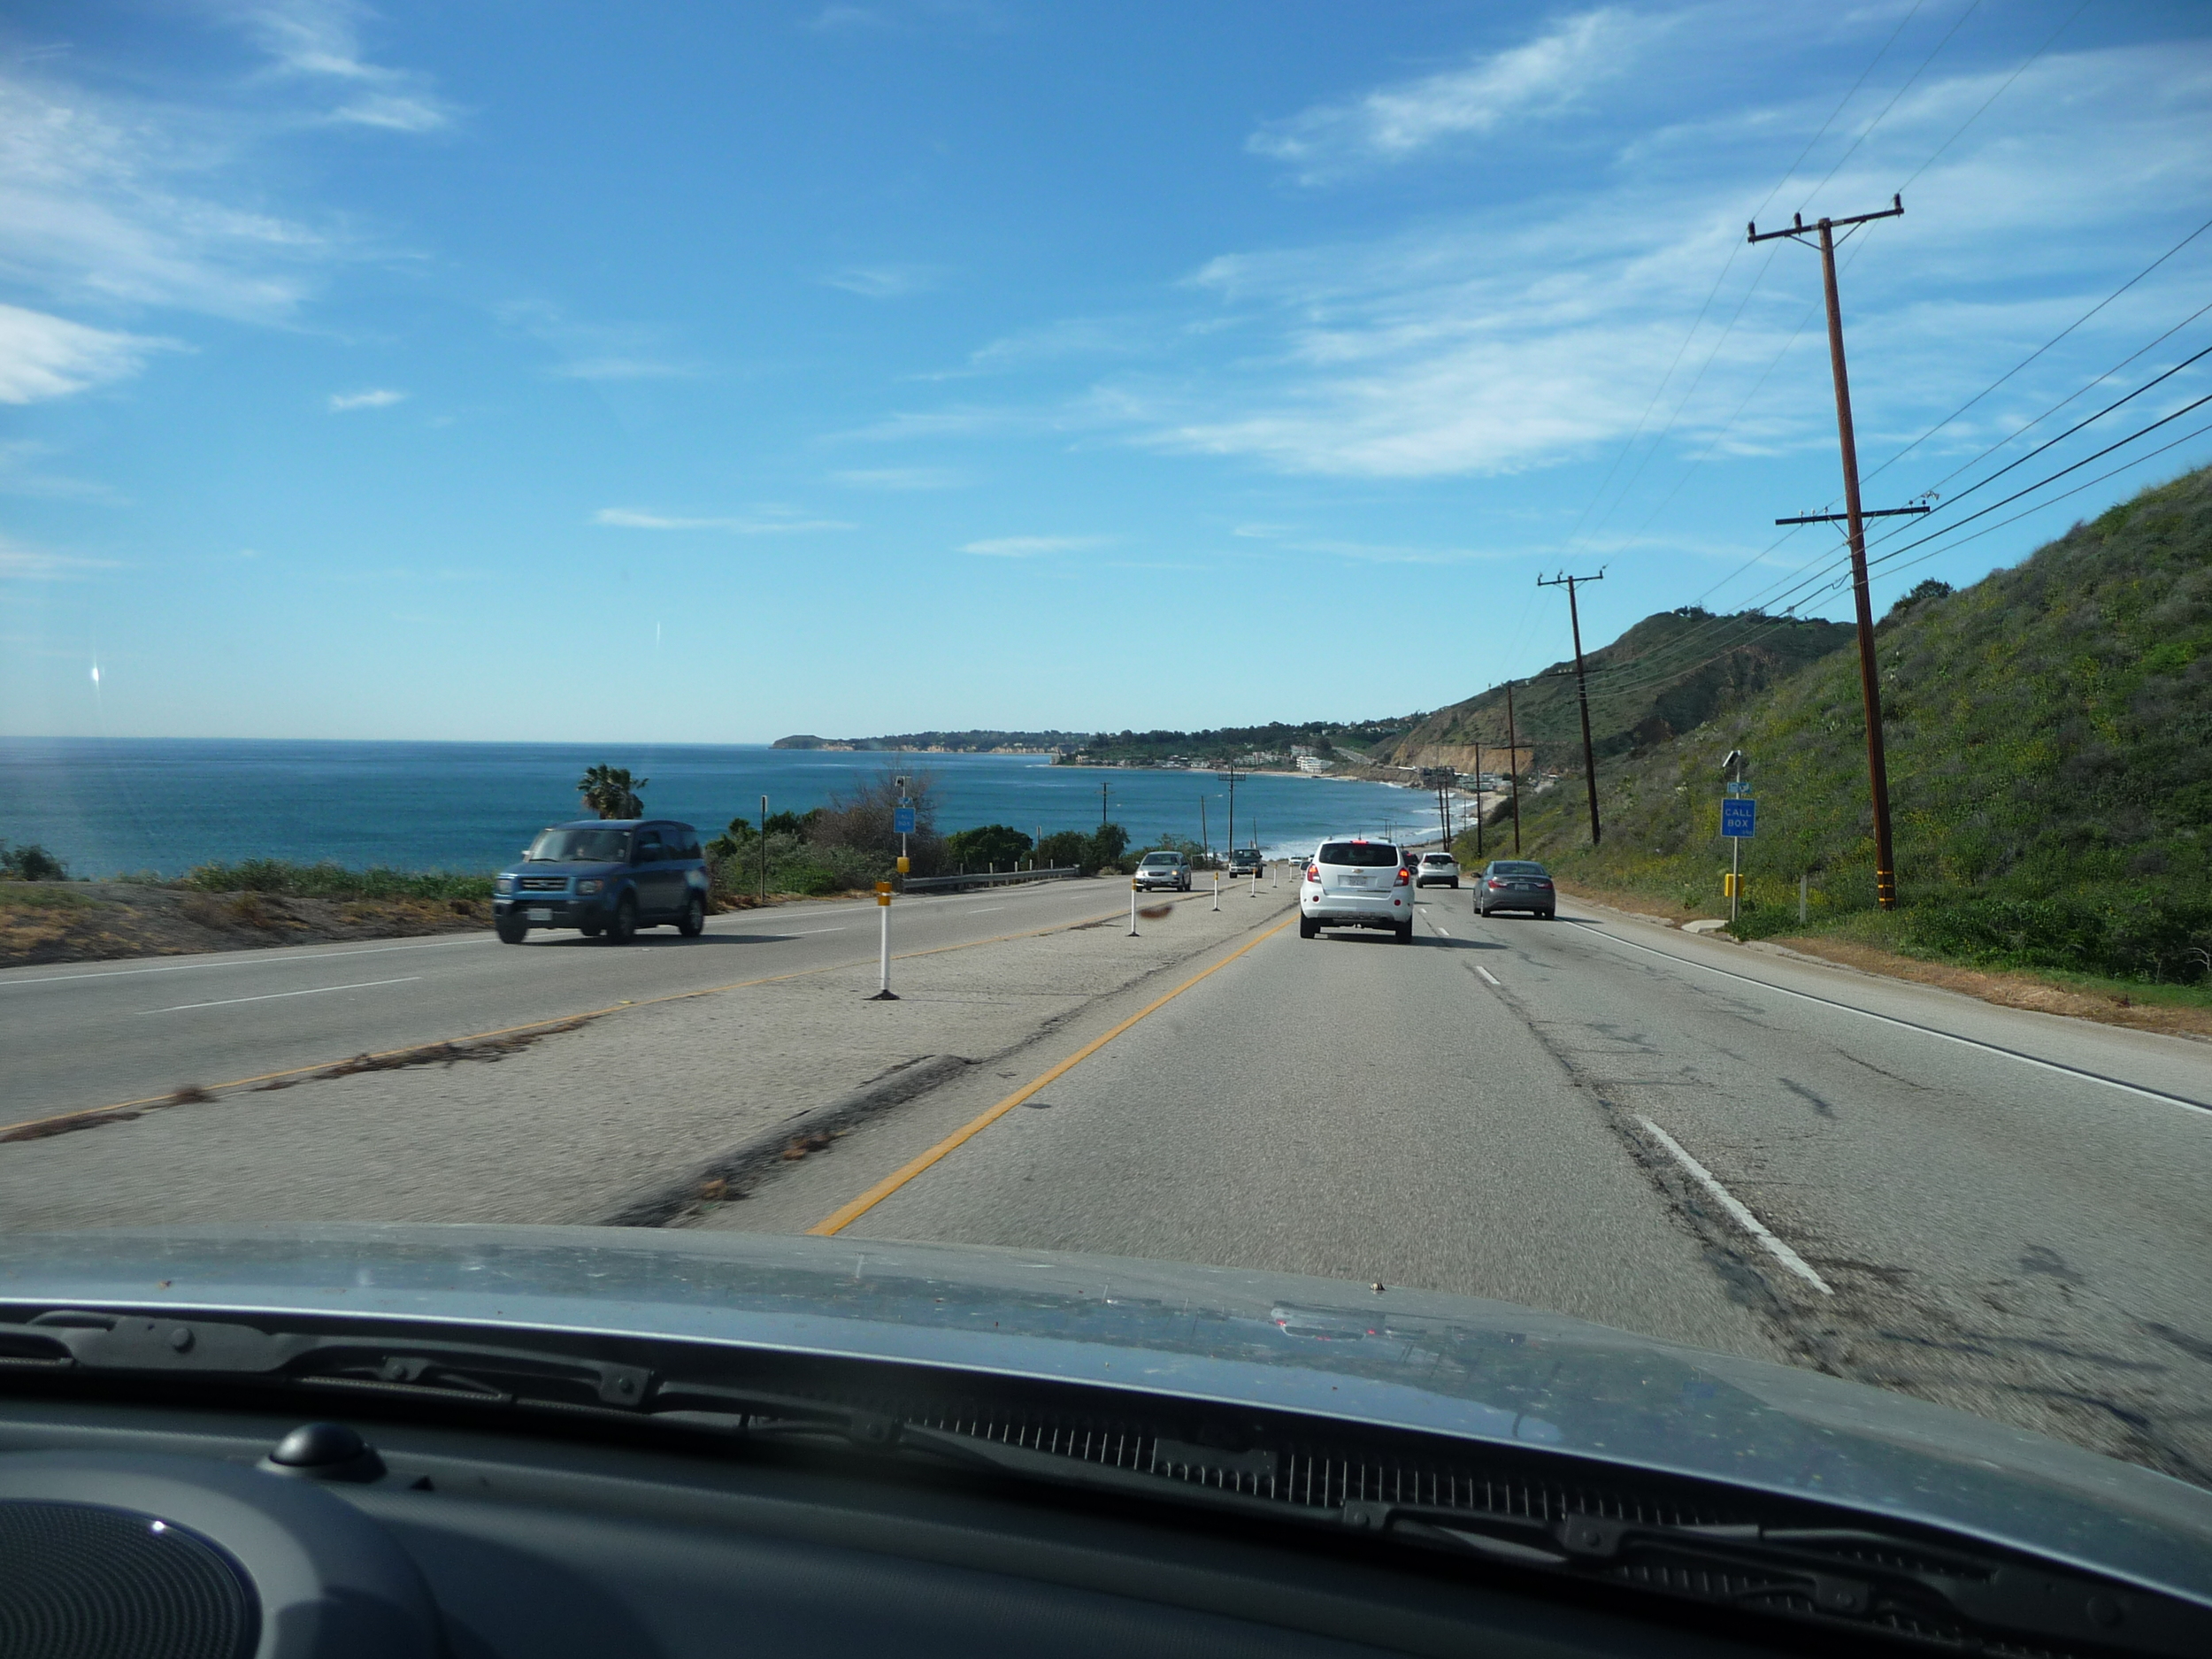  View of the coastline from the car 